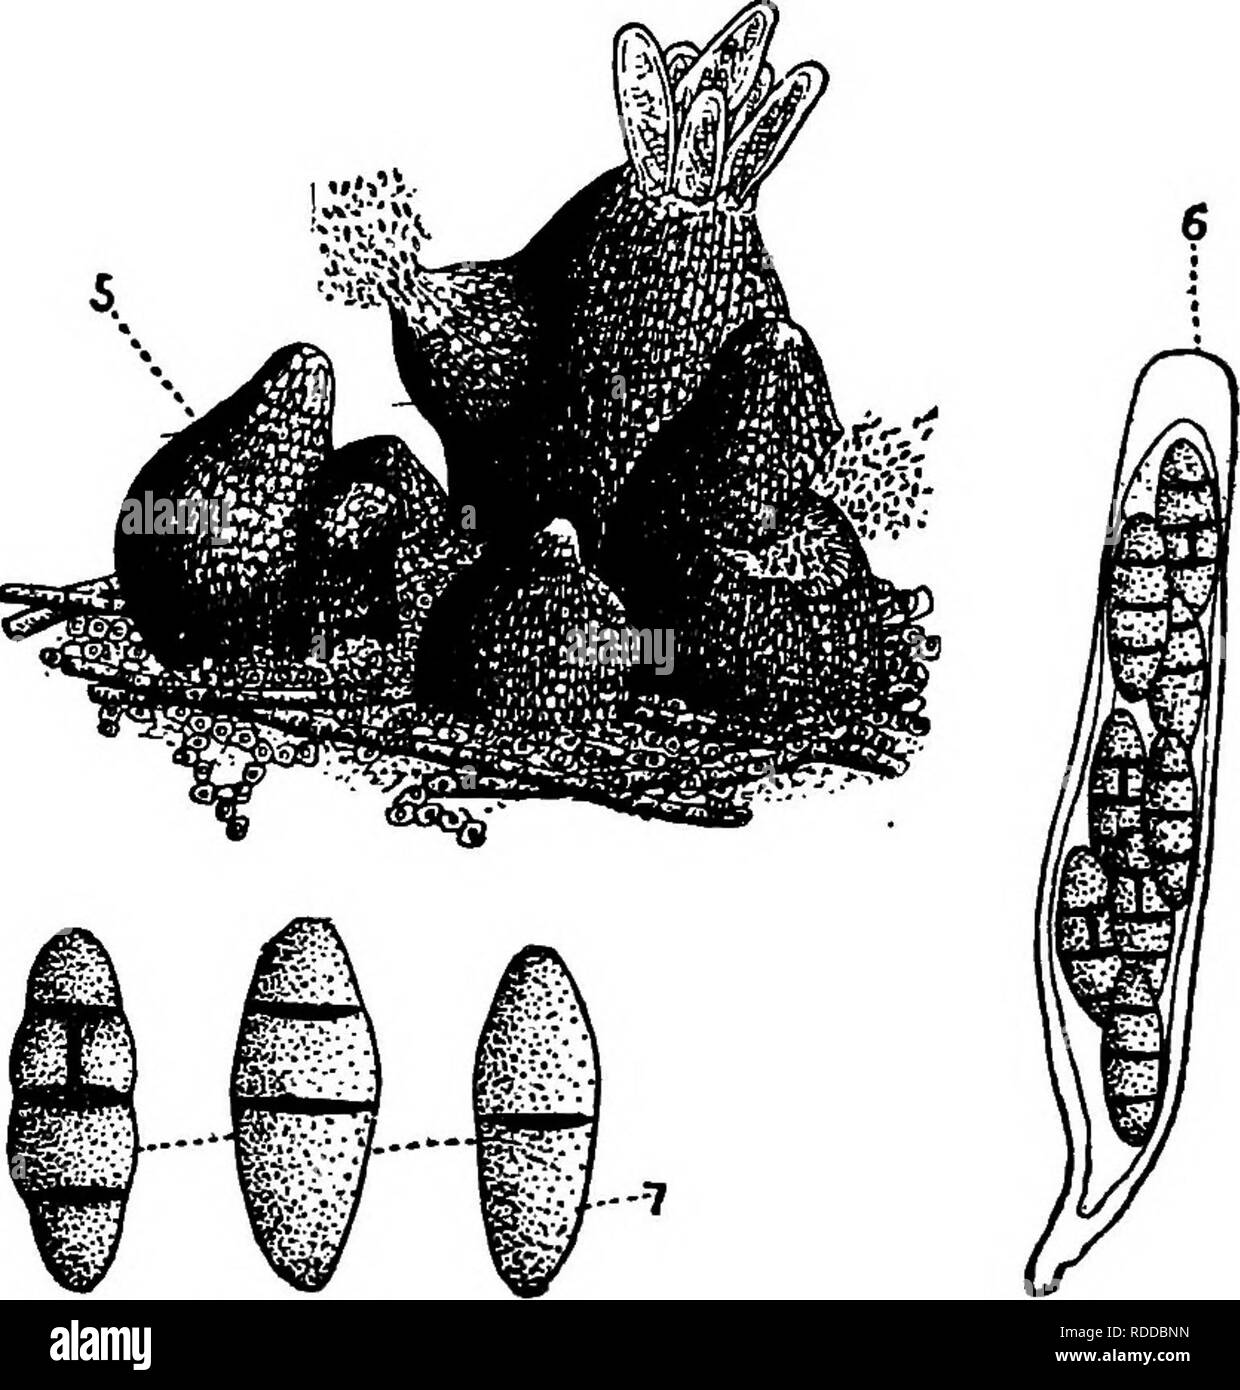 . The fungi which cause plant disease . Plant diseases; Fungi. 192 THE FUNGI WHICH CAUSE PLANT DISEASE minute cells as in the Erysiphacese; spores ovate, guttulate, hyaline, 10 X 8 /i; conidia of various kinds, formed from the bases of the perithecia, (a) multicellular macroconidia, (b) unicellular micro- conidia, (c) gemmse. A. brasiliense Noack is reported on grape ^&quot; in Brazil. Various species also occur on numerous woody and herbaceous plants which are infected with aphids or upon which their &quot;honey dew&quot; falls. Antennaria Link differs but little from Apiosporium. A. pithyoph Stock Photo